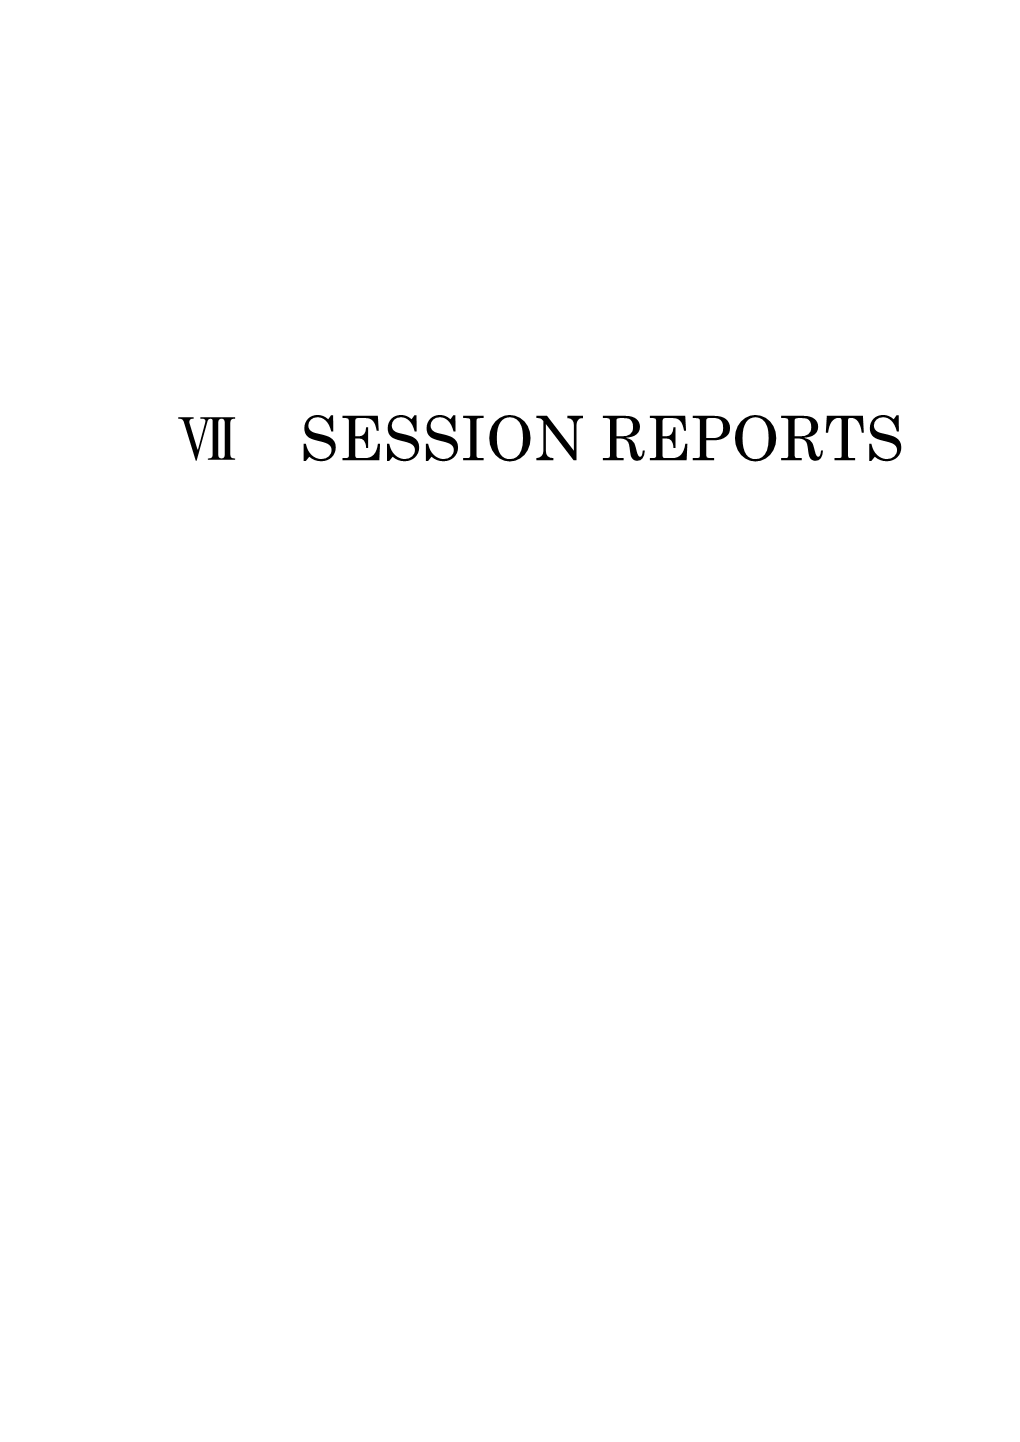 ⅶ Session Reports